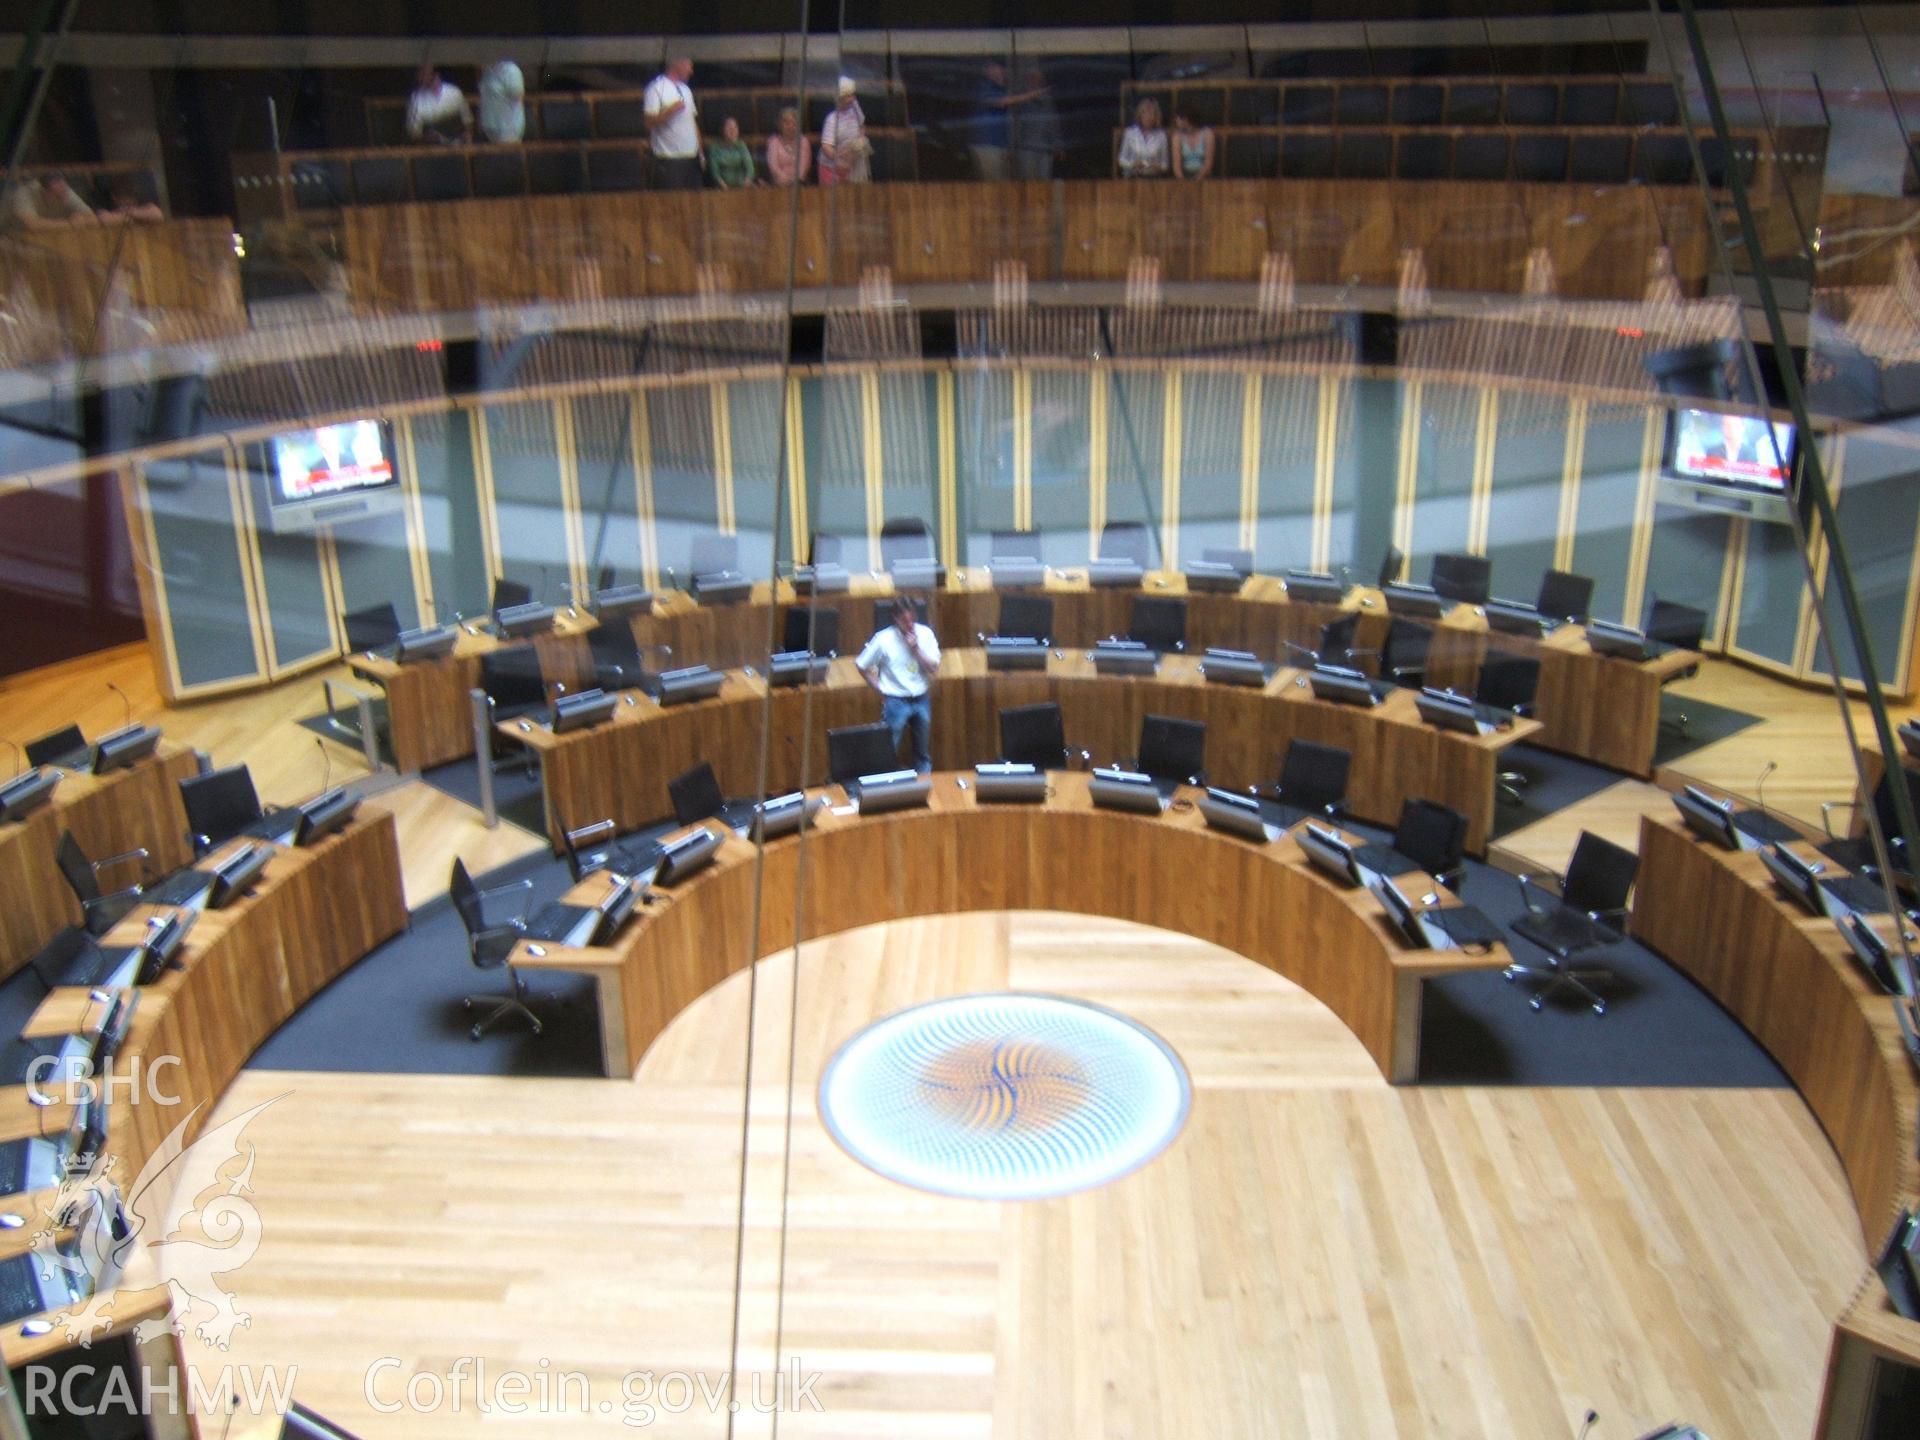 Debating chamber from Public Gallery looking south-west.